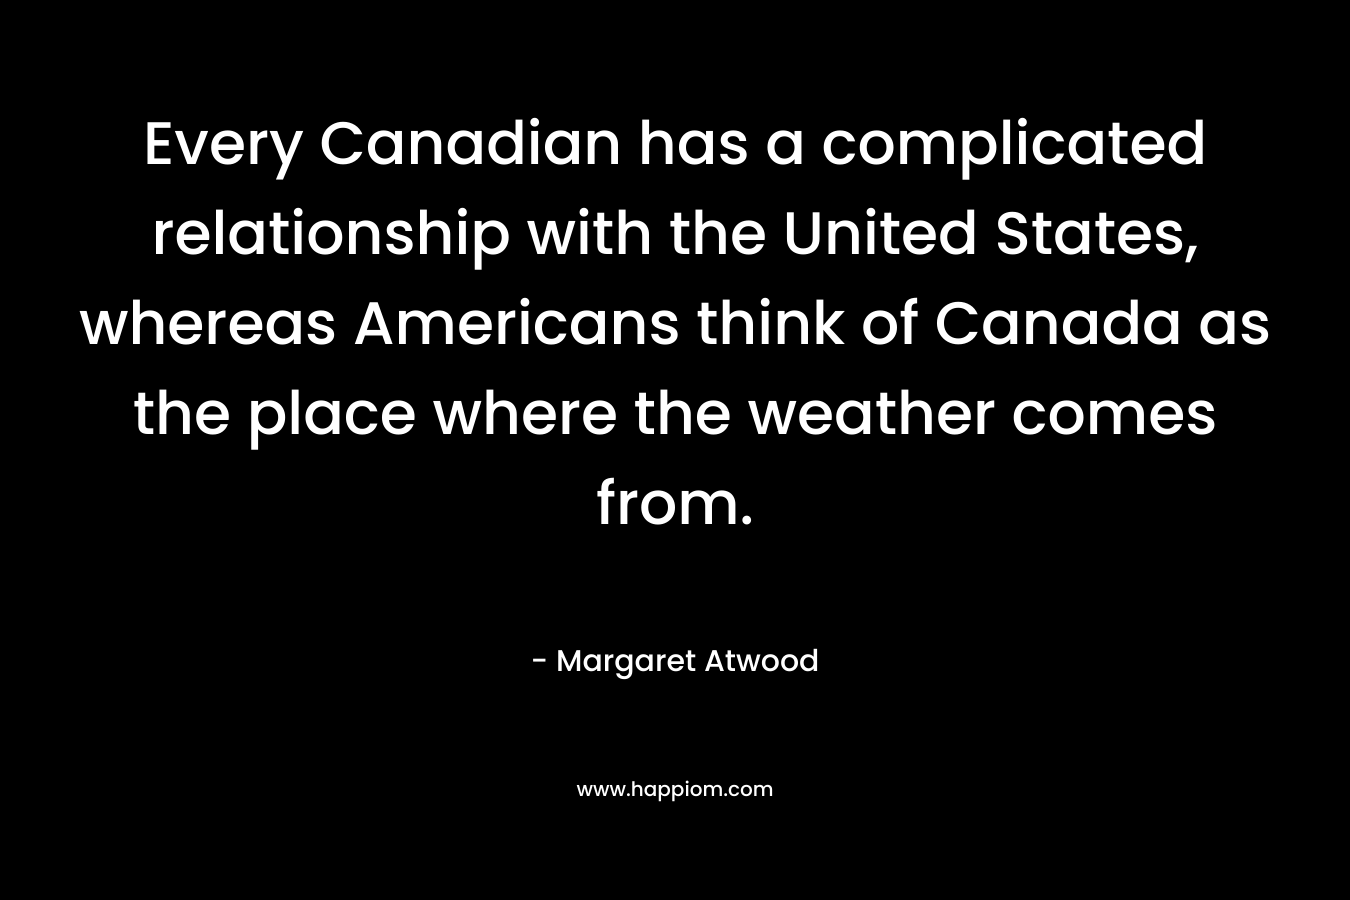 Every Canadian has a complicated relationship with the United States, whereas Americans think of Canada as the place where the weather comes from.